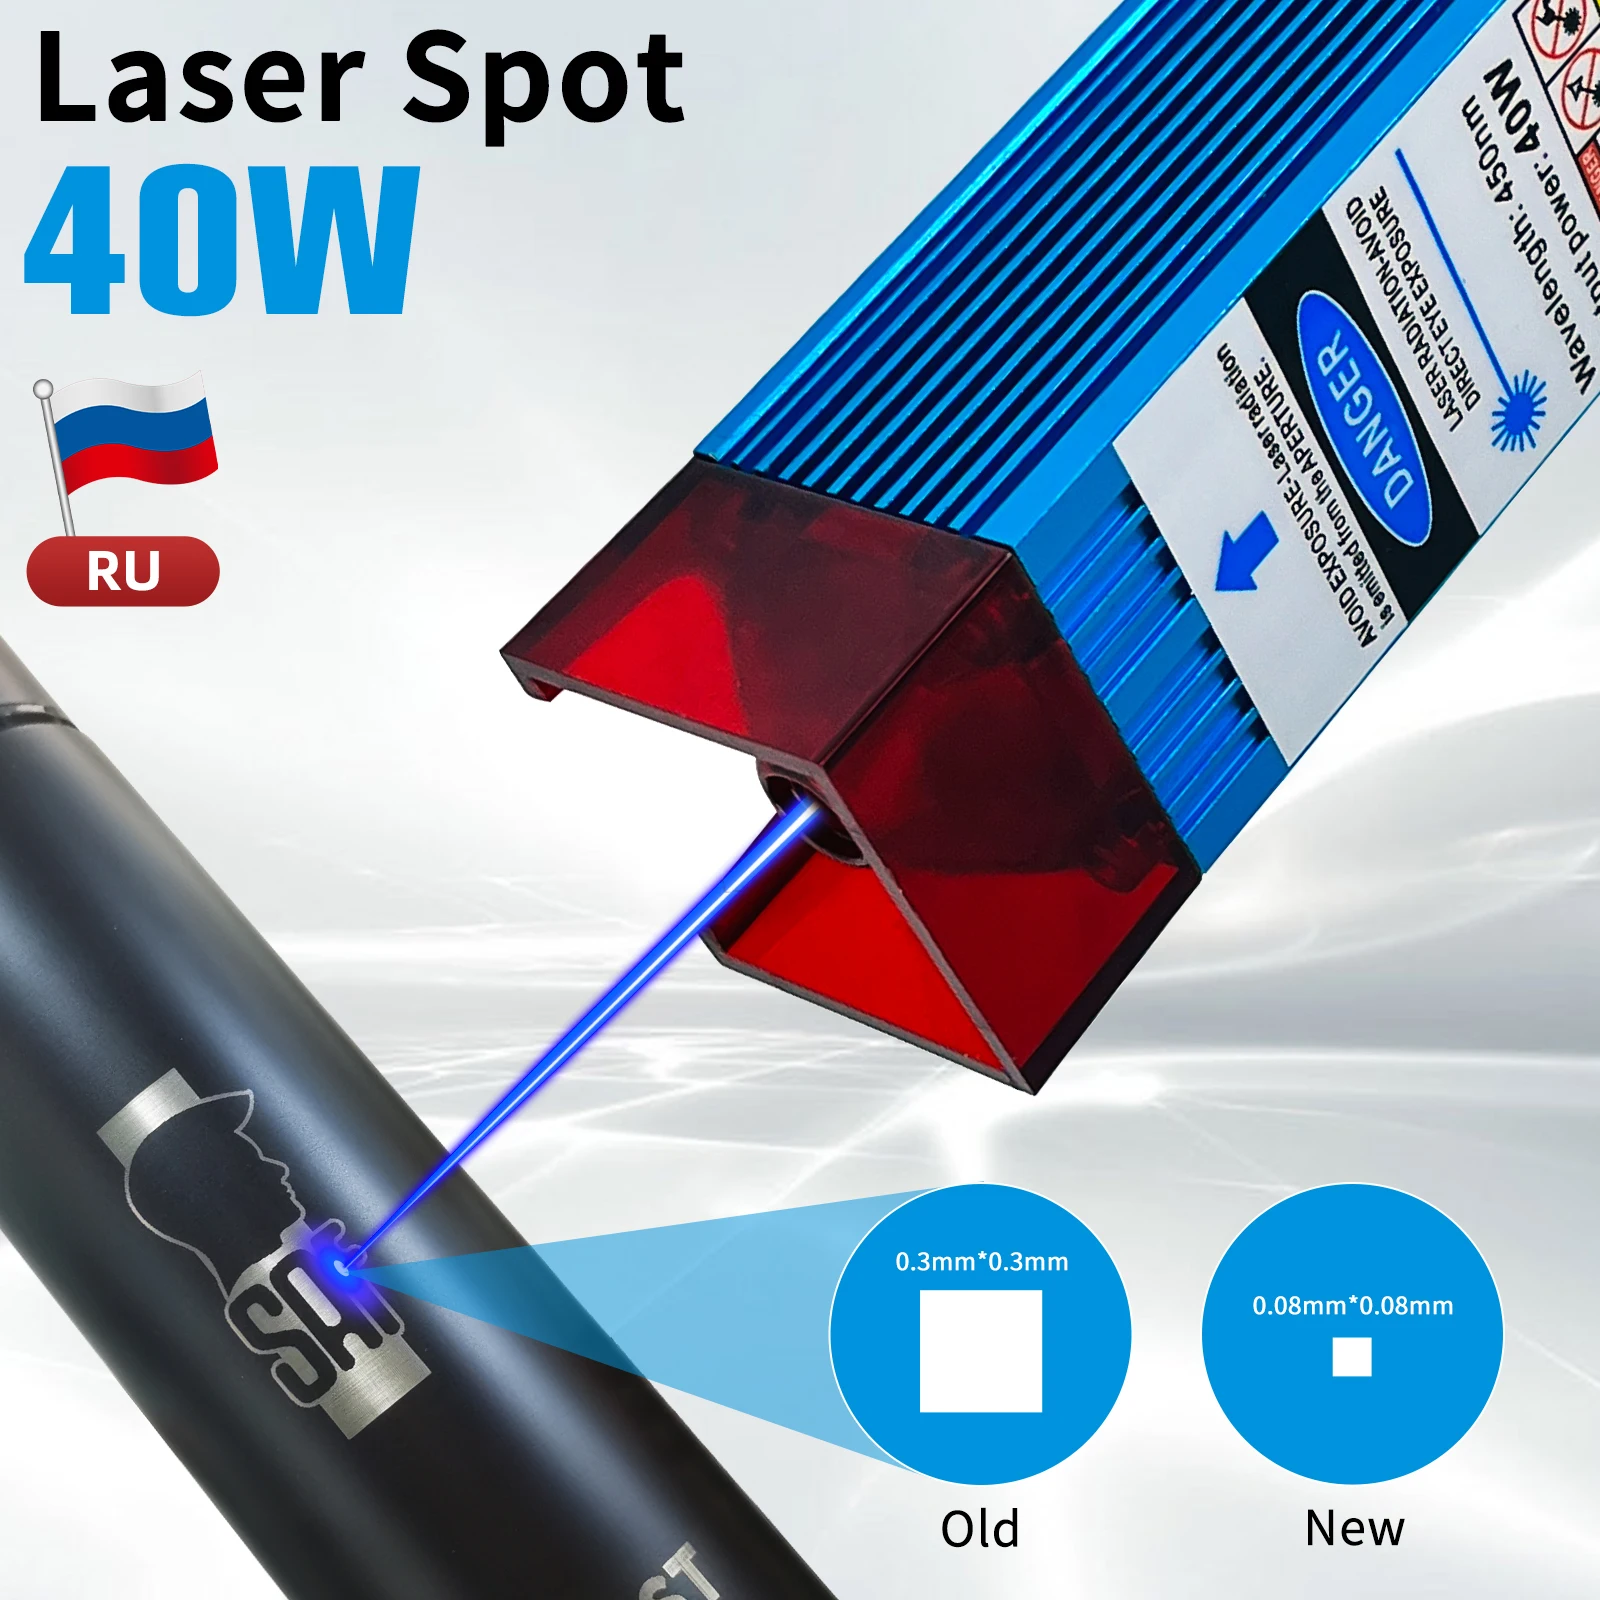 Laser Module 450nm 40W TTL/PWM Laser Engraving Head DIY CNC Laser Cutting For Wood Engraving Tool Compressed Spot Technology